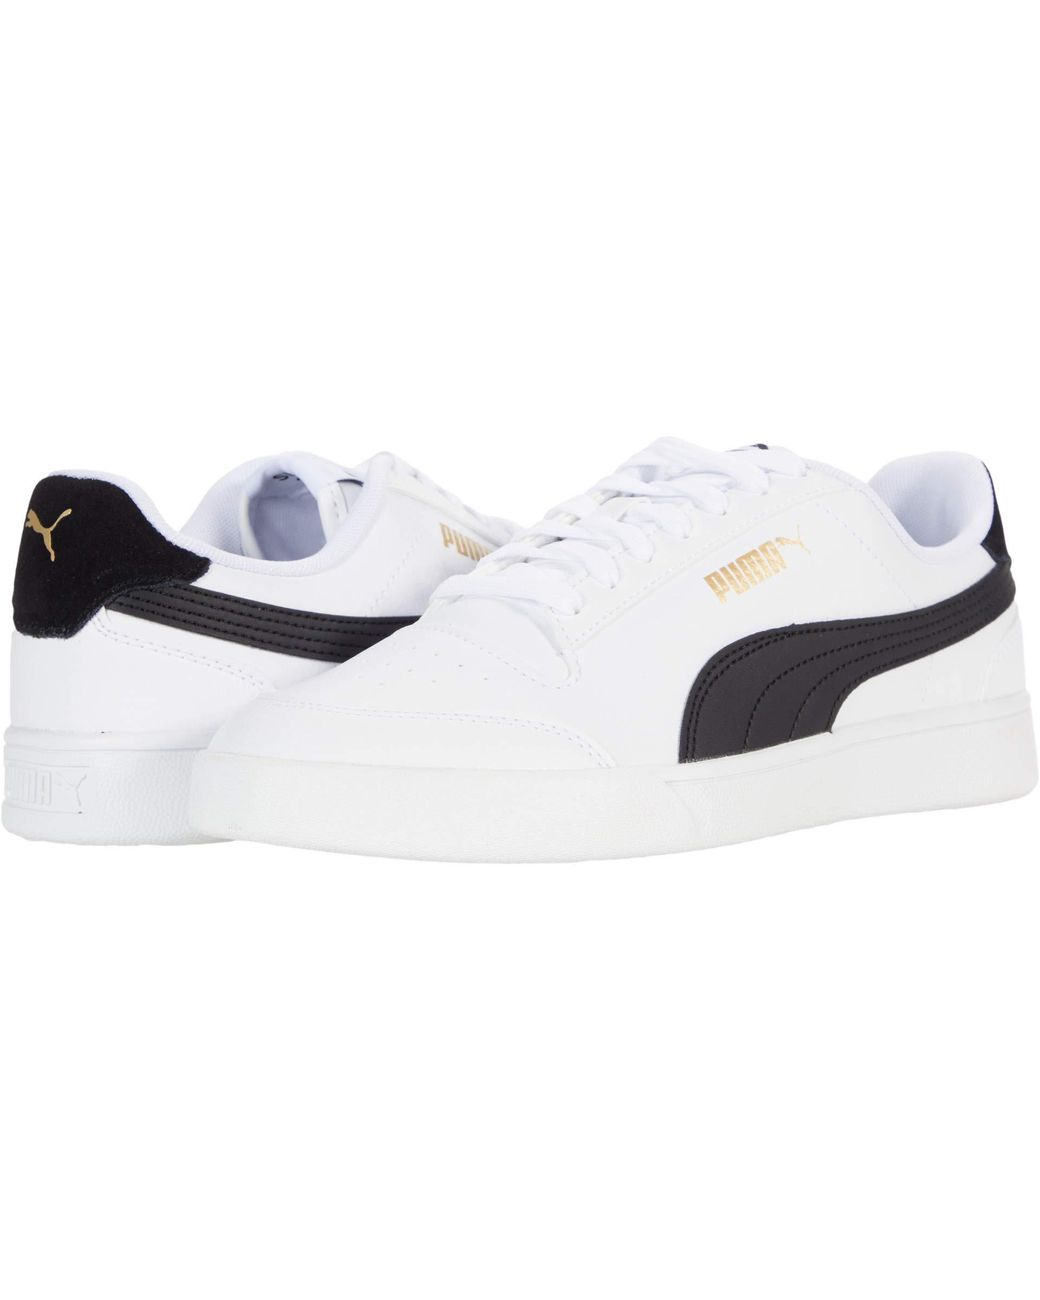 PUMA Synthetic Shuffle Sneaker in White for Men - Save 29% - Lyst